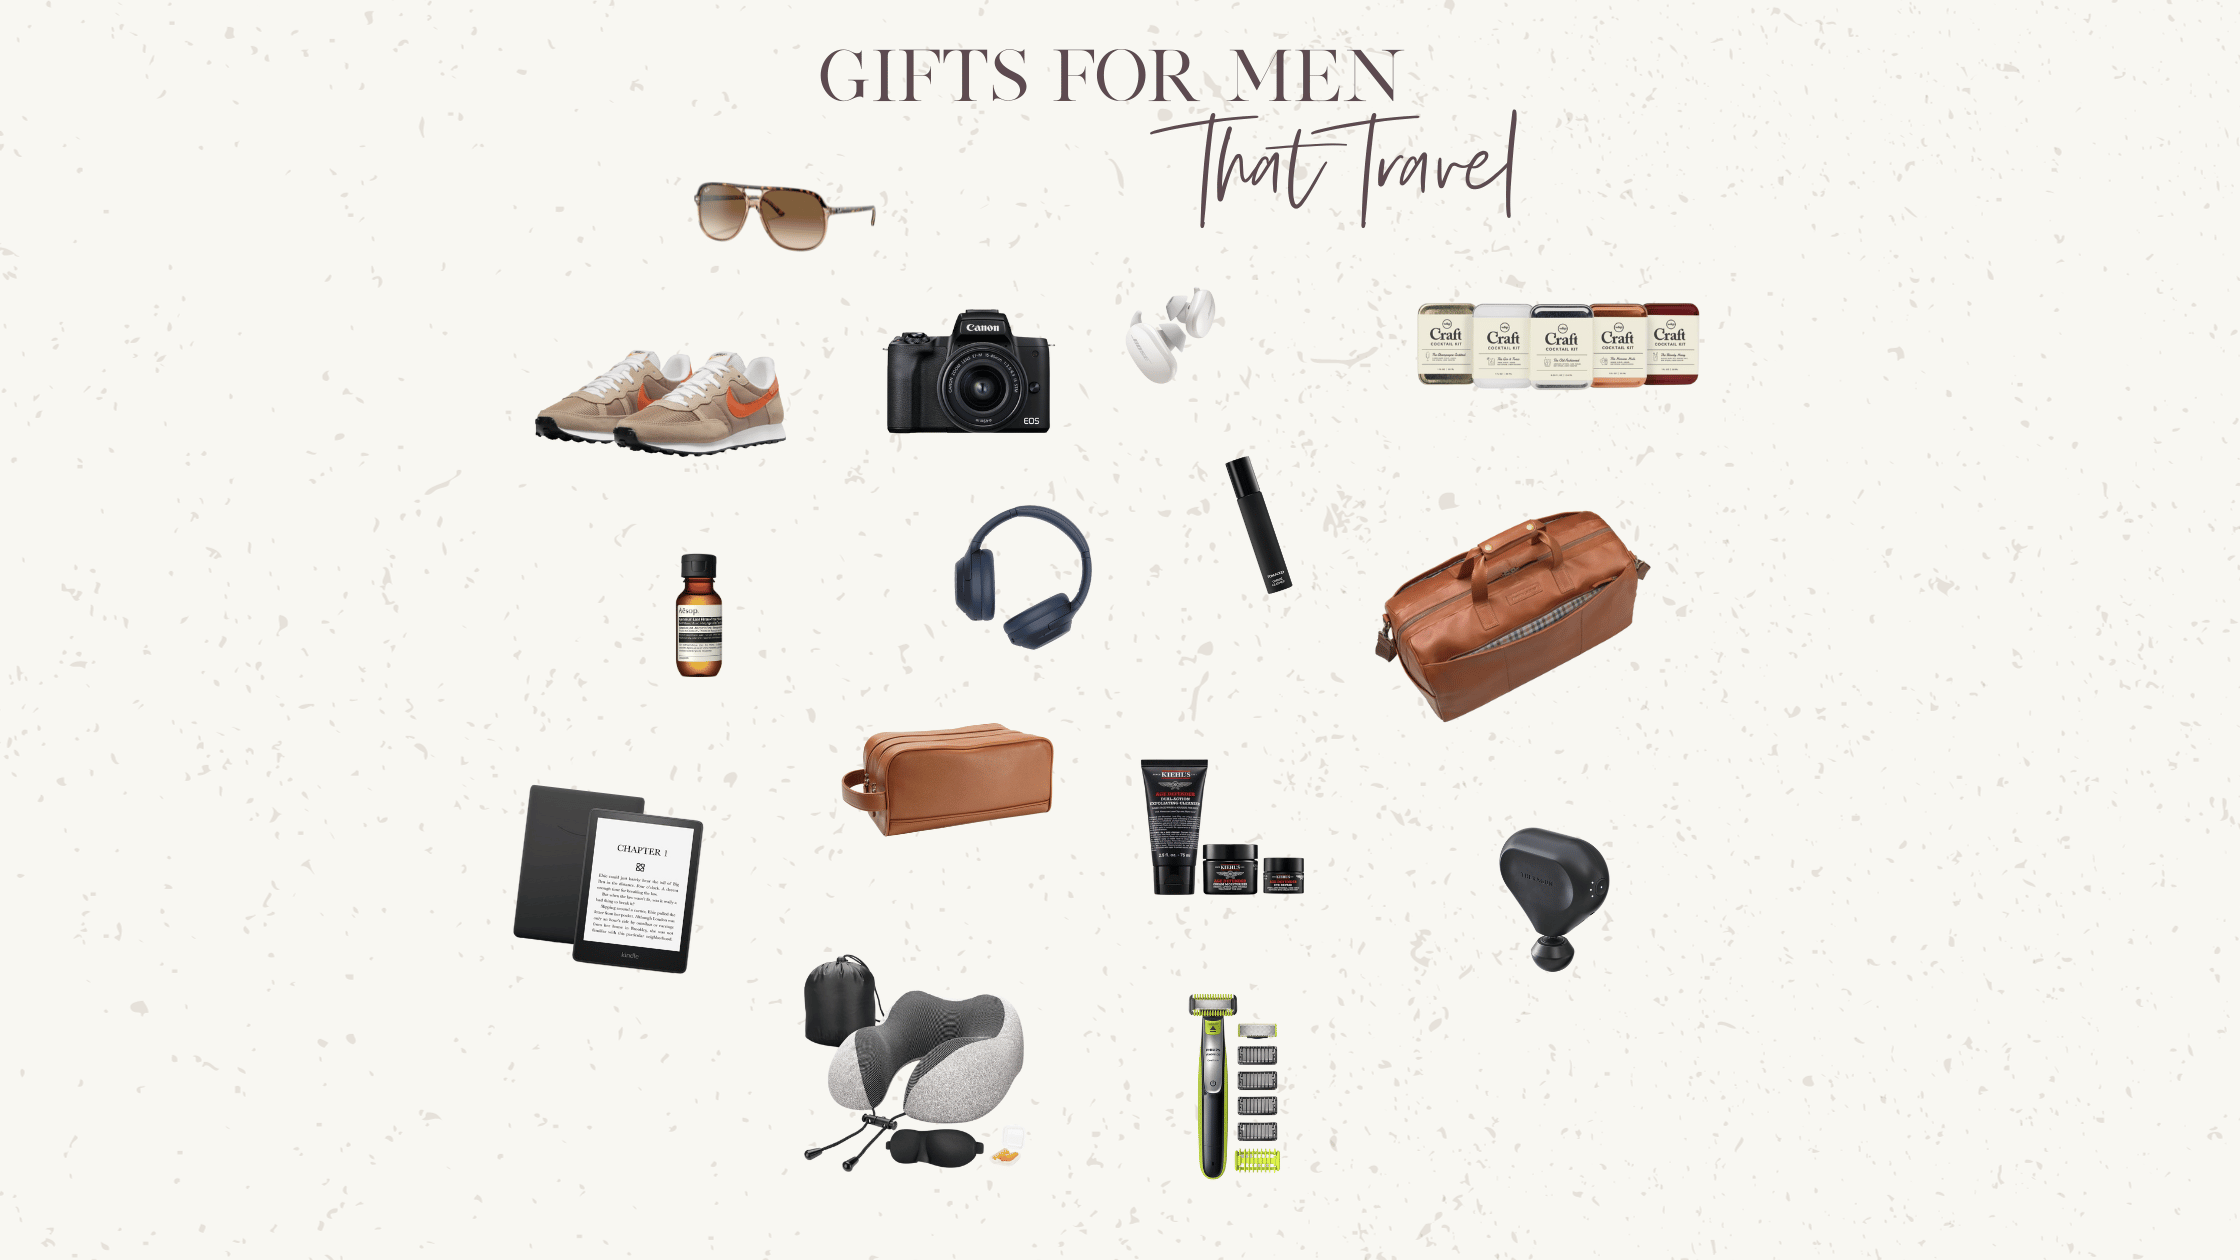 Gifts for Men that Travel